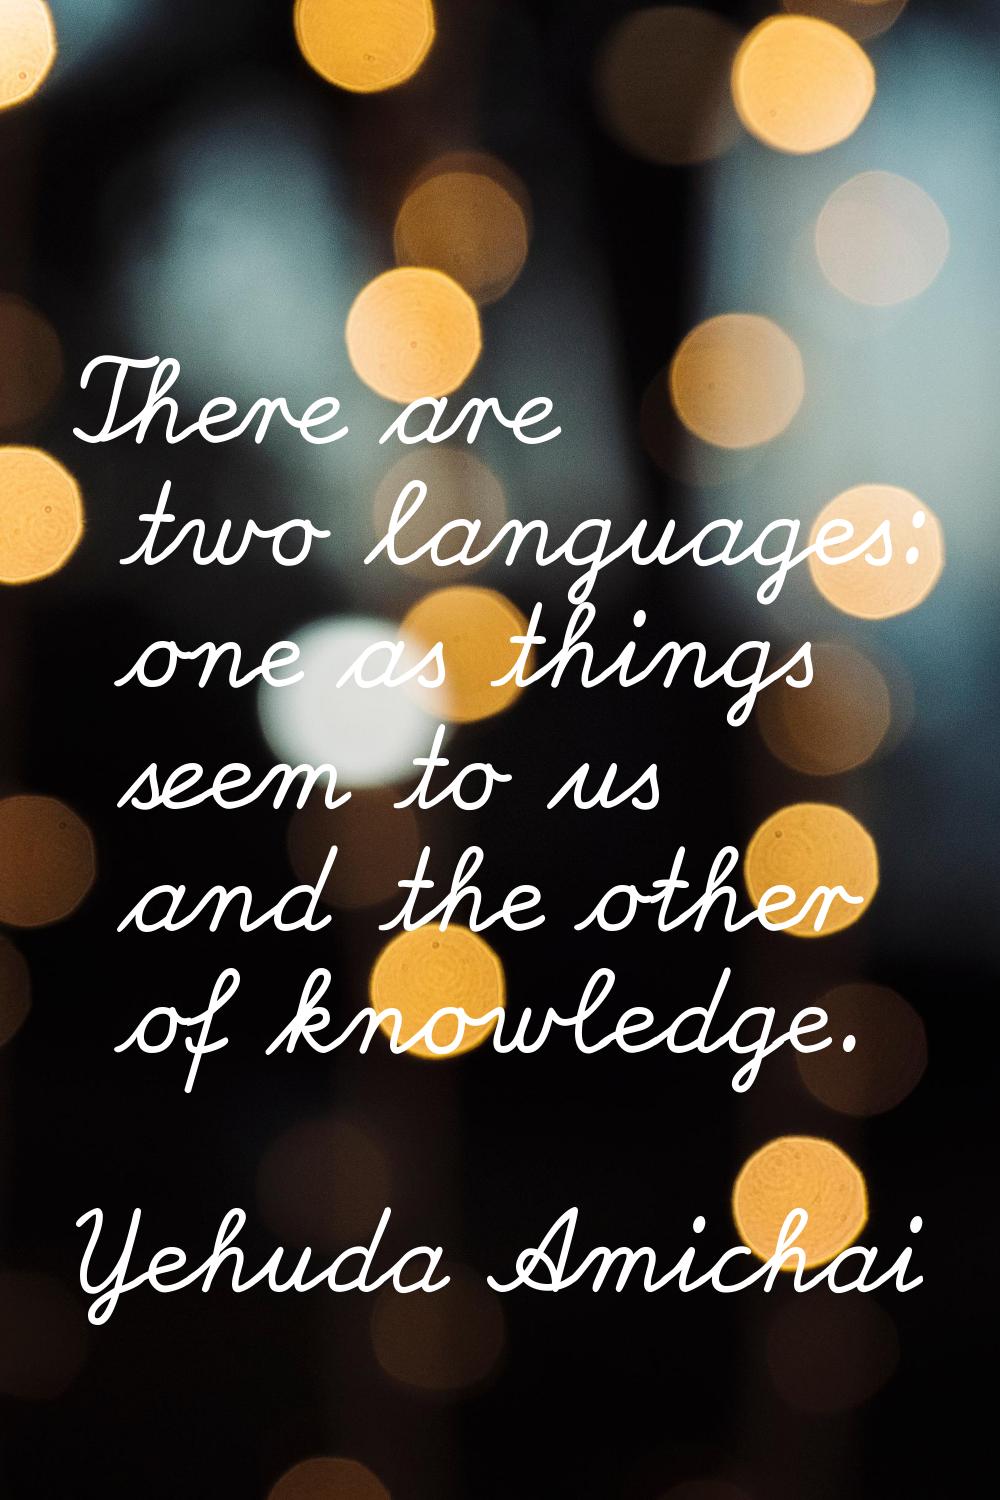 There are two languages: one as things seem to us and the other of knowledge.